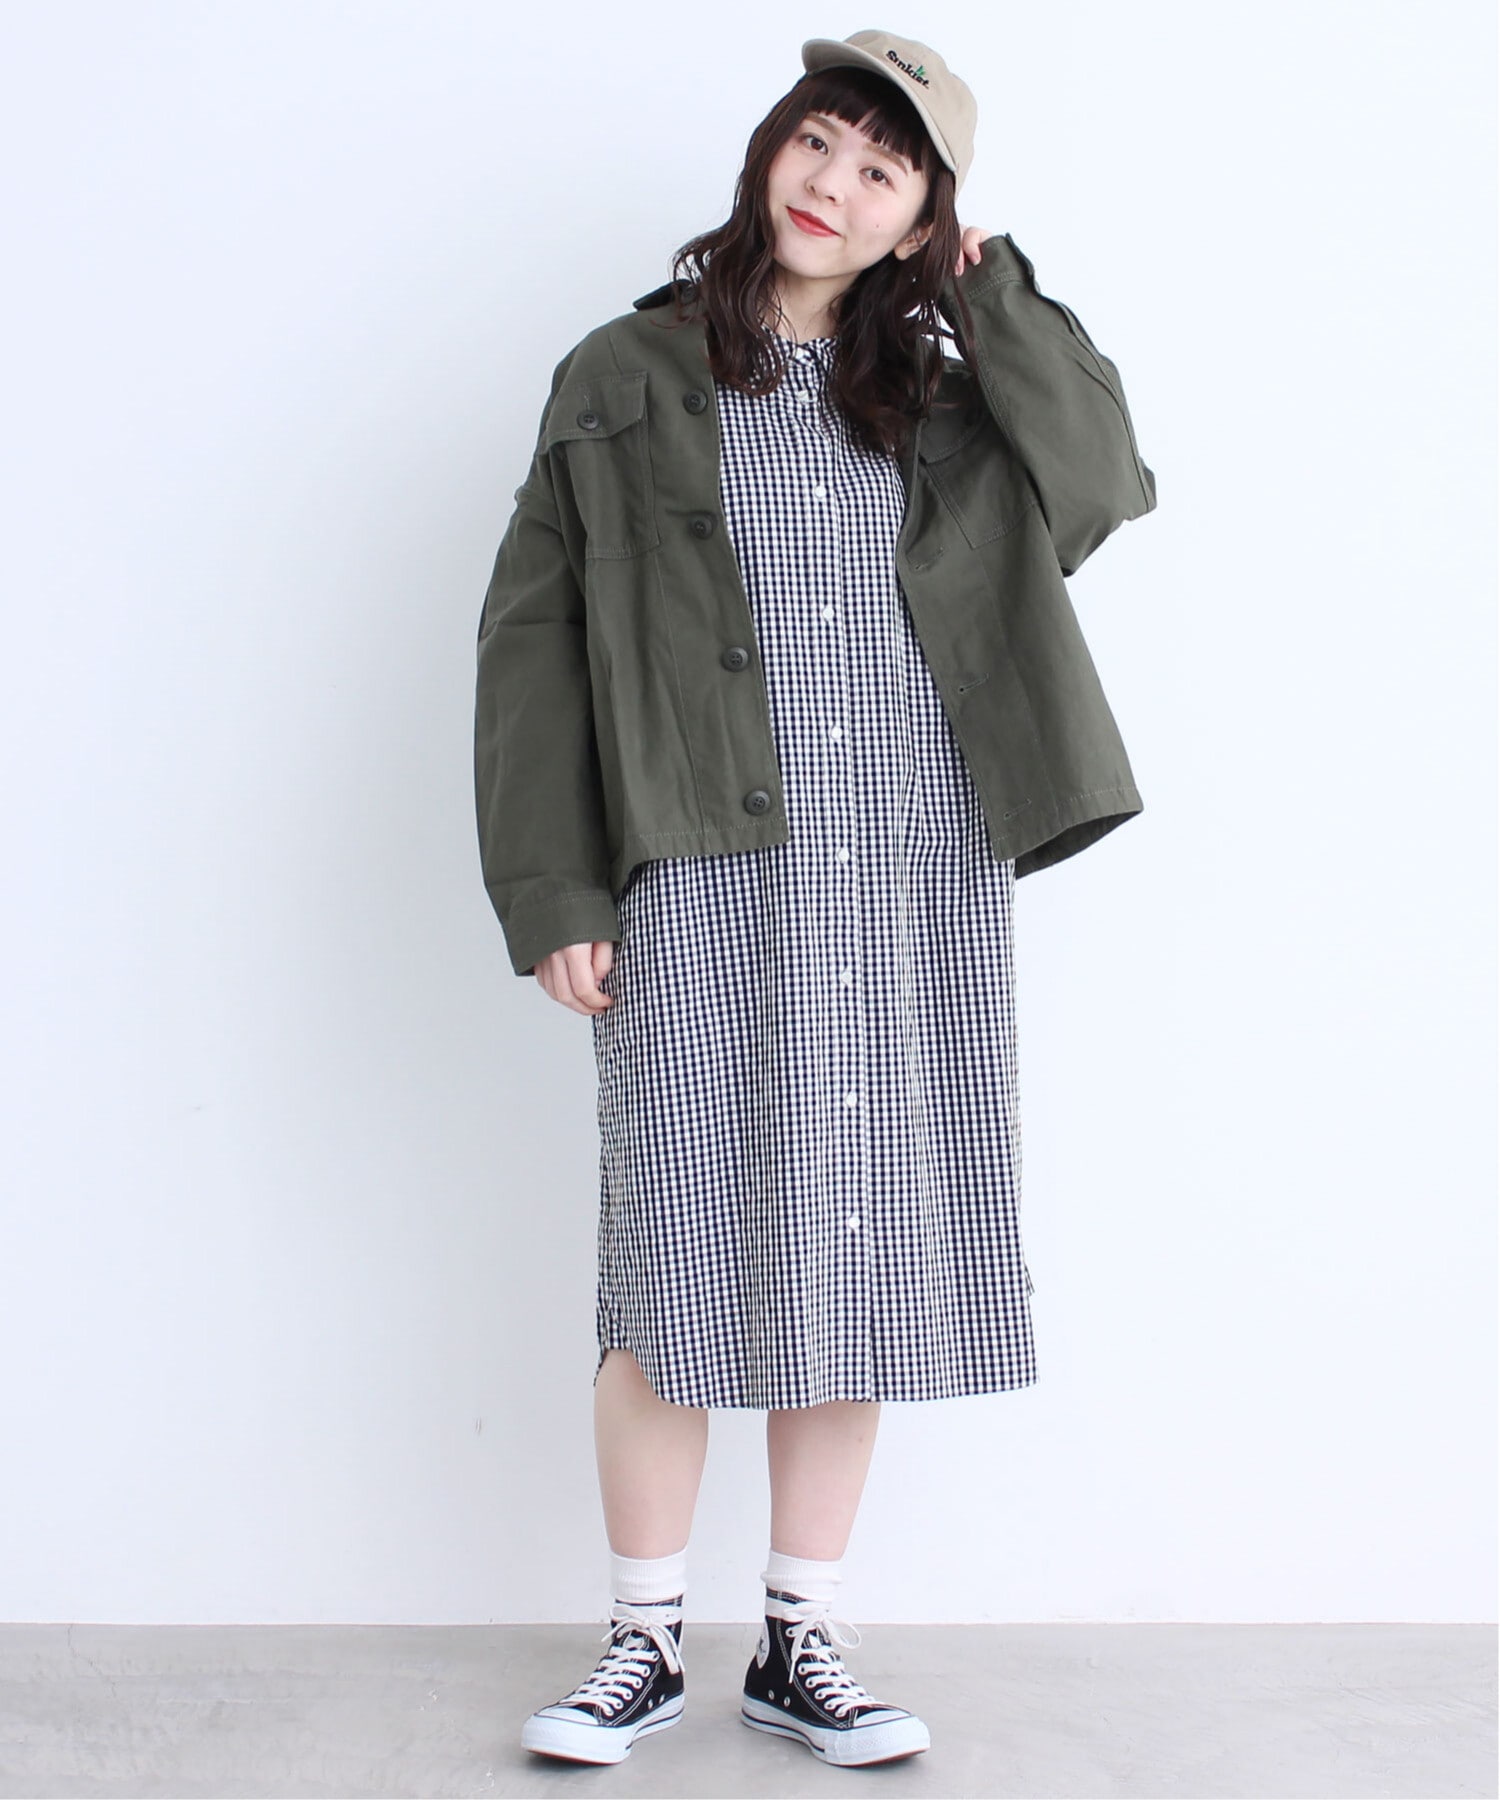 Ambidex Store ギサギンガム ウエストリボンbigシャツワンピース F グリーン Dot And Stripes Child Woman